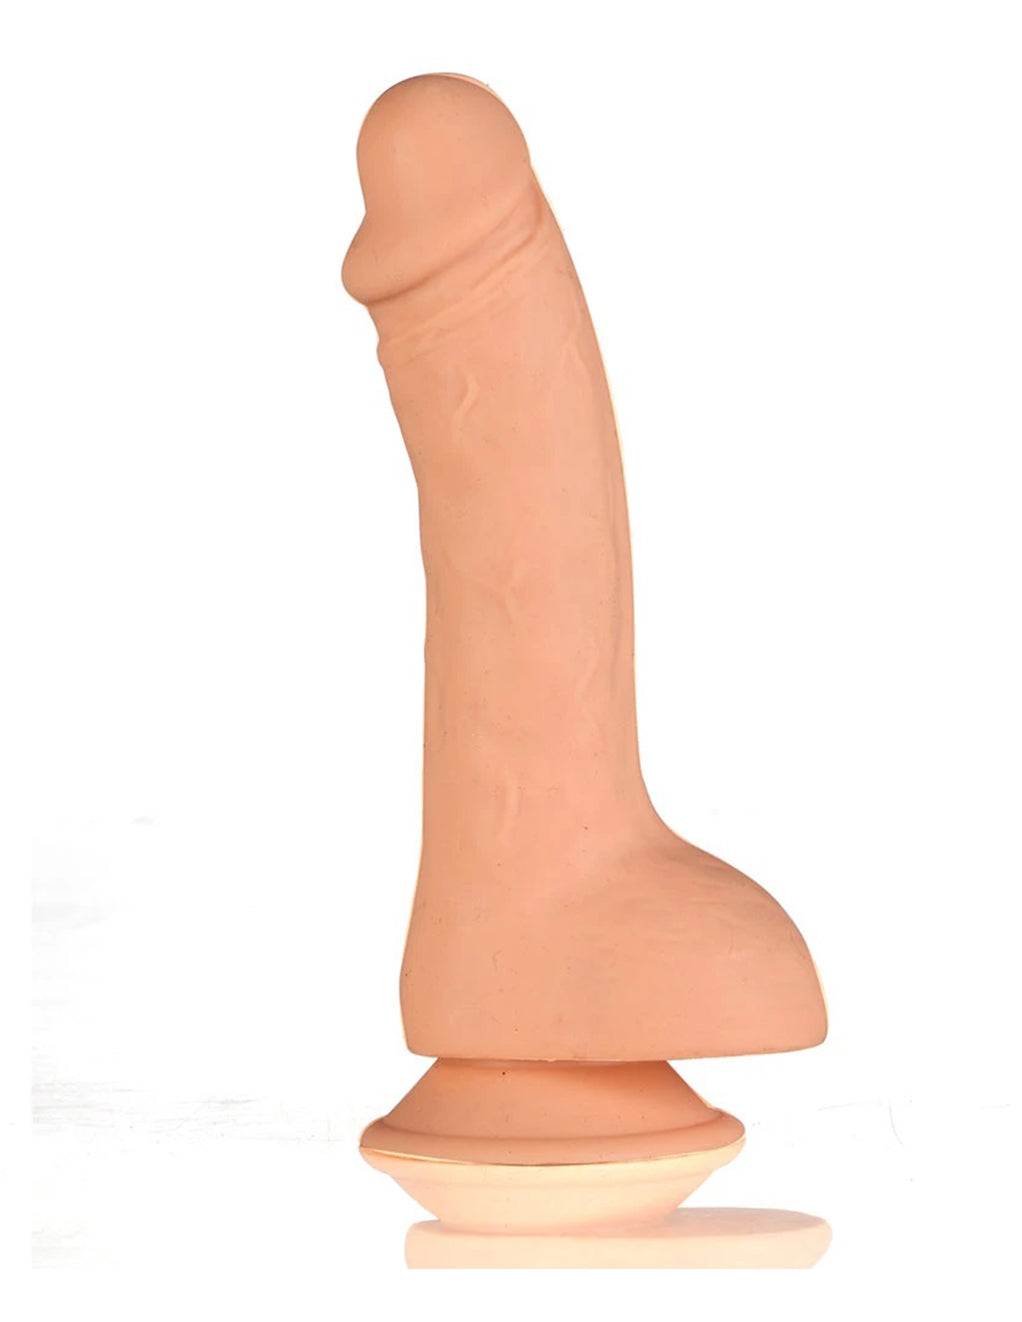 Maia Kyle 8 inch Silicone Suction Cup Dildo Novelties at Hustler Hollywood